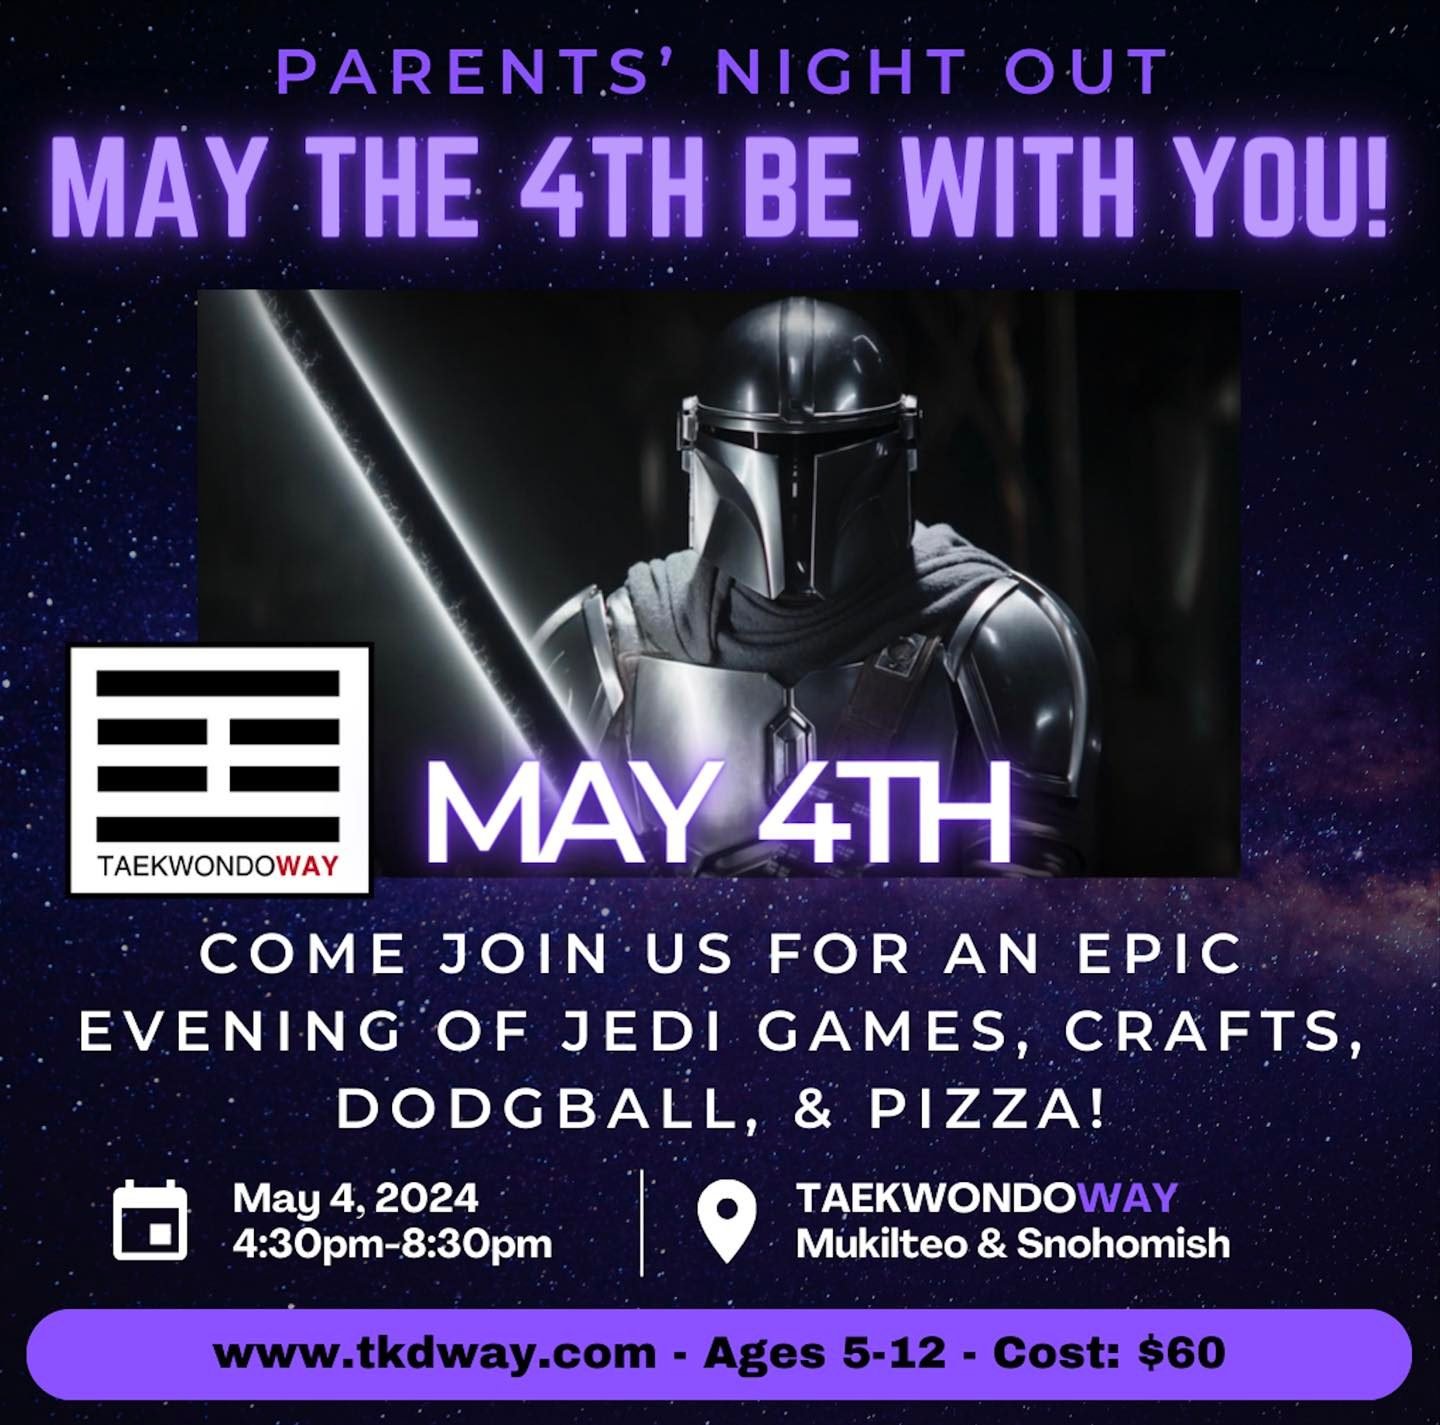 Today is the last day to register for tomorrow&rsquo;s Star Wars themed Parents&rsquo; Night Out! Students will decorate pool noodle light sabers, play themed games, and have pizza!